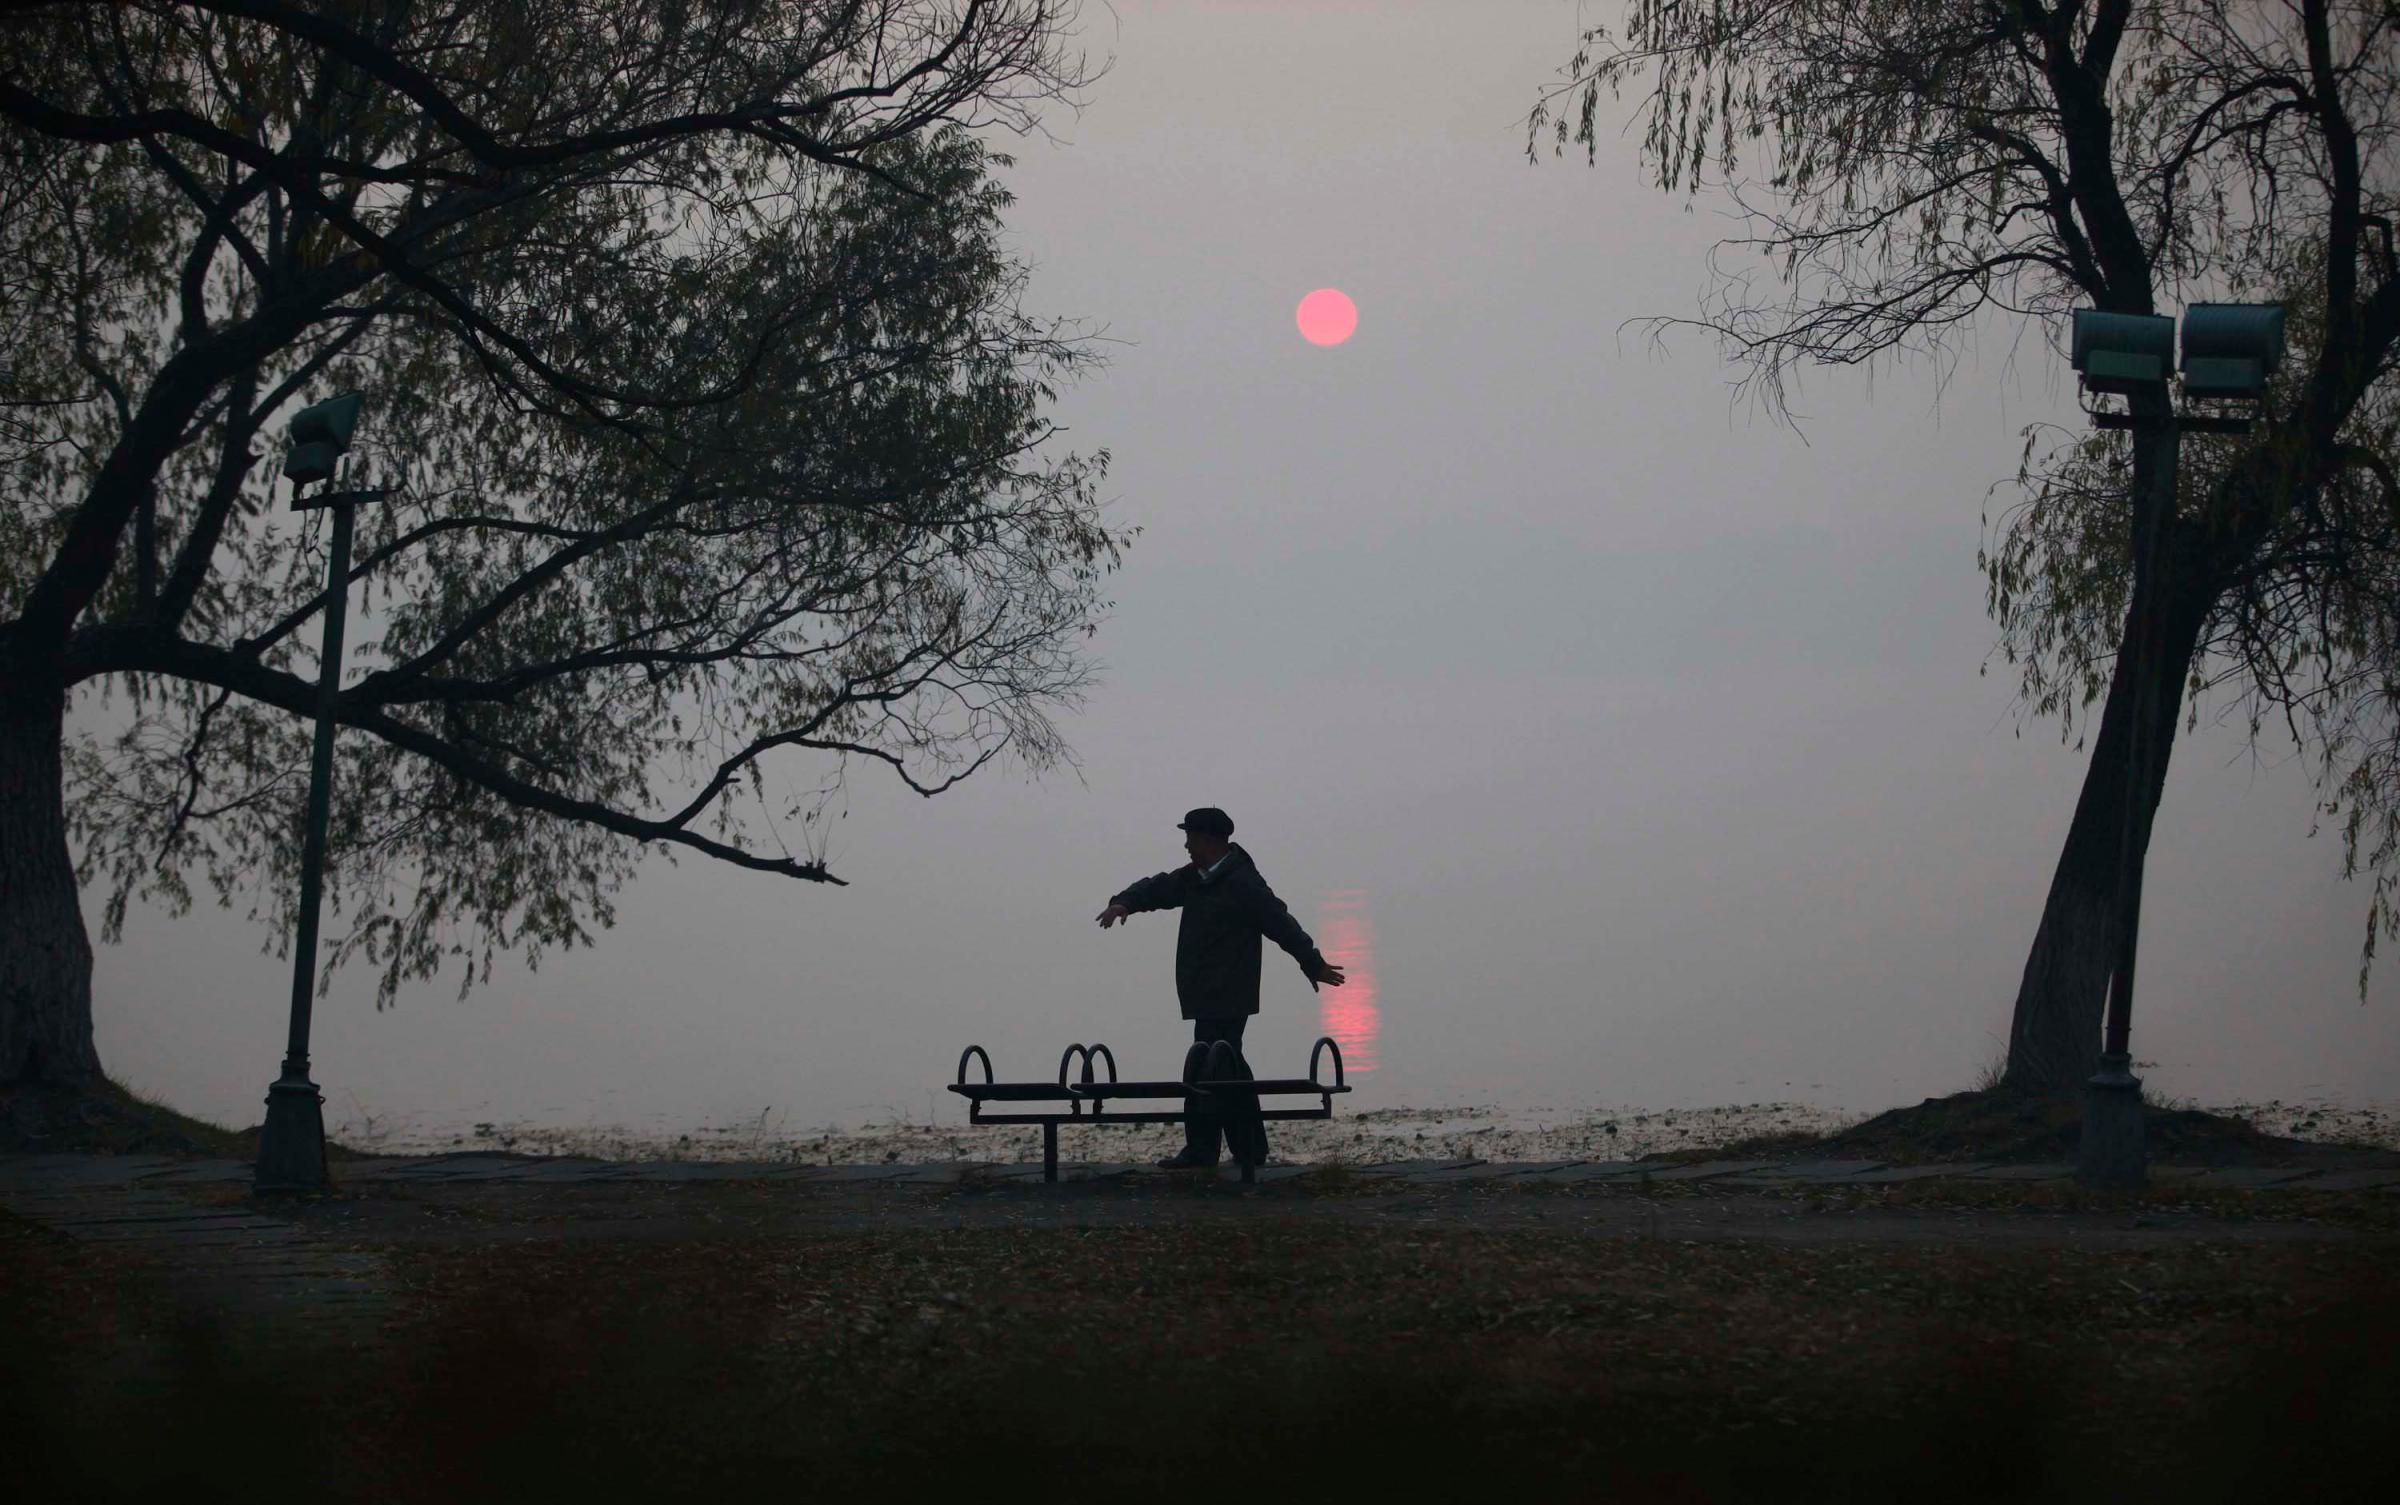 A man does his morning exercise on a polluted day by the side of a lake at Nanhu Park in Changchun, Jilin province, China on Oct. 22, 2014.